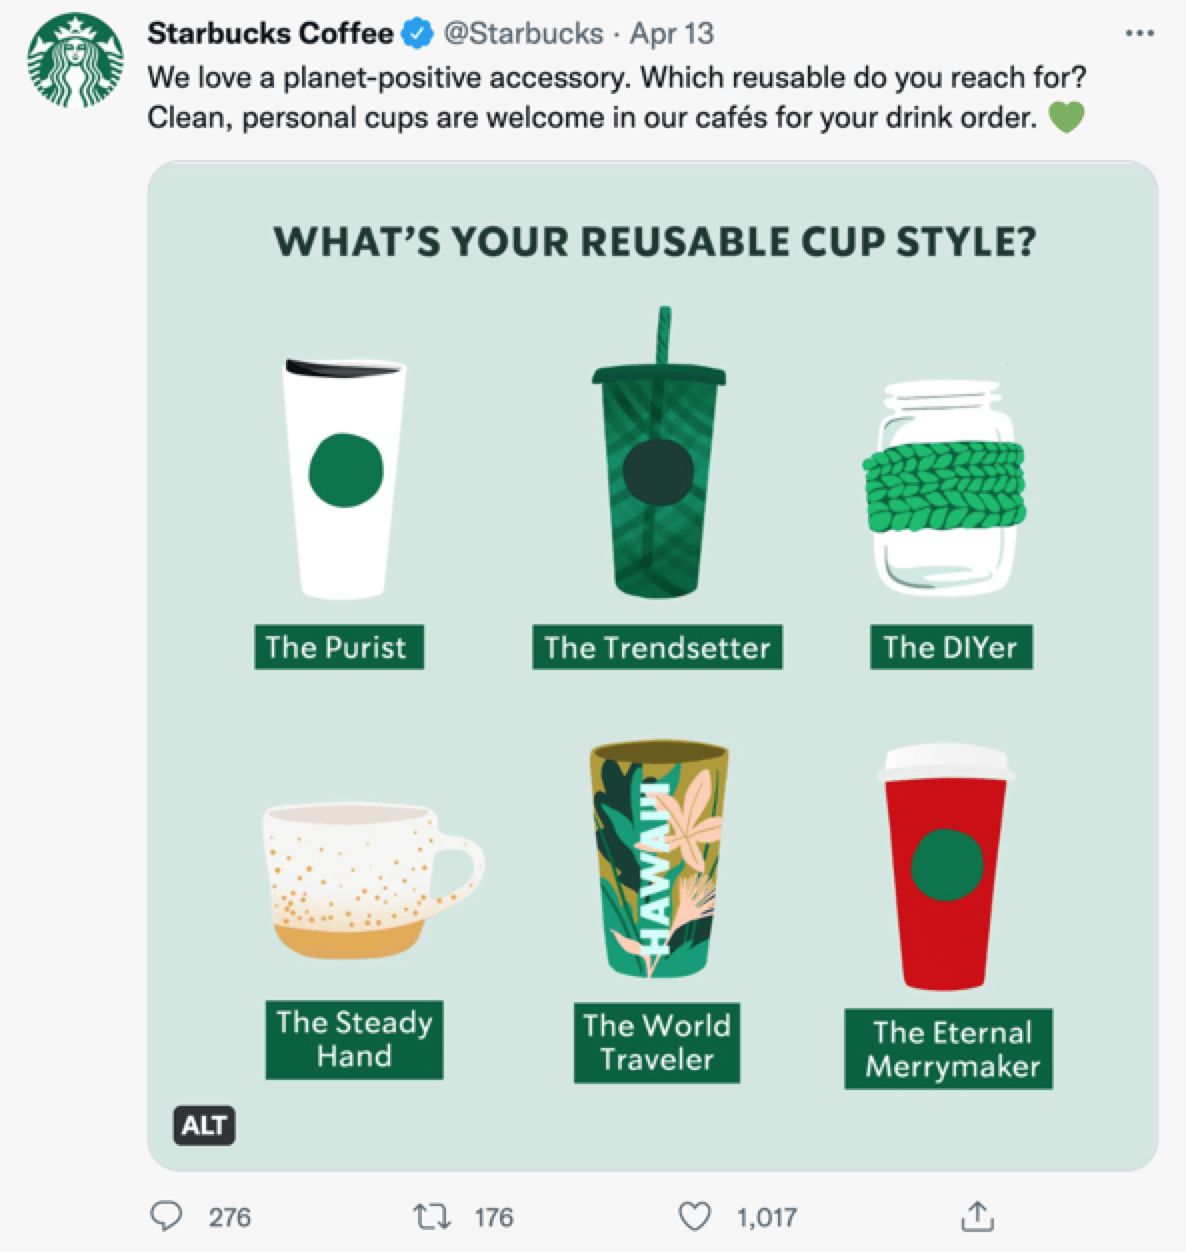 A social media post on Twitter from Starbucks that reads, "We love a planet-positive accessory. Which reusable do you reach for? Clean, personal cups are welcome in our cafes for your drink order." The Tweet includes a graphic with different types of Starbucks reusable cups.